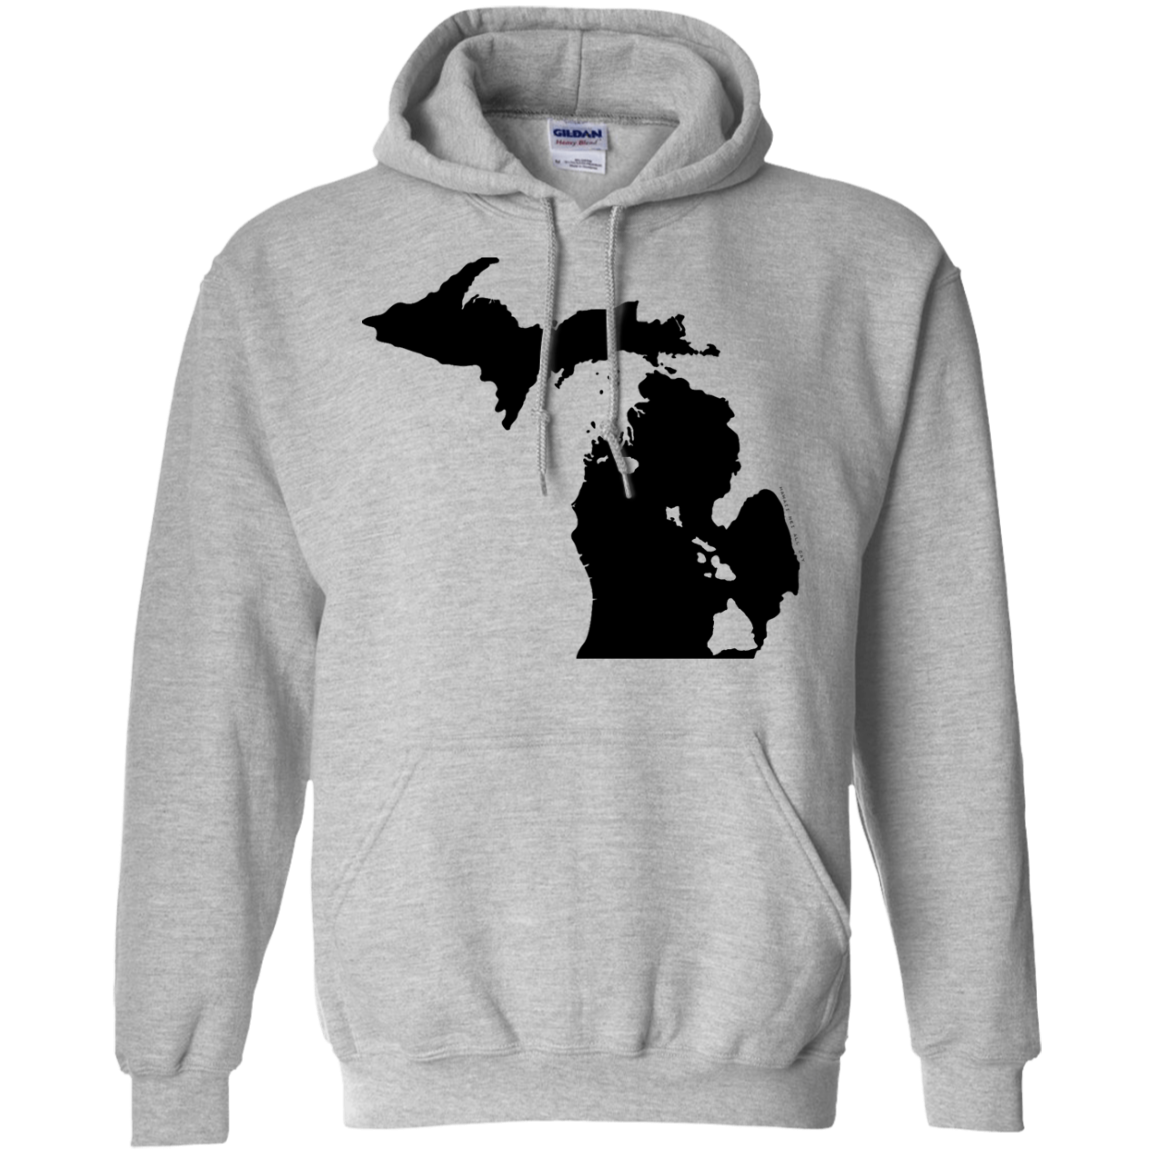 Living in Michigan with Hawaii Roots Pullover Hoodie 8 oz., Sweatshirts, Hawaii Nei All Day